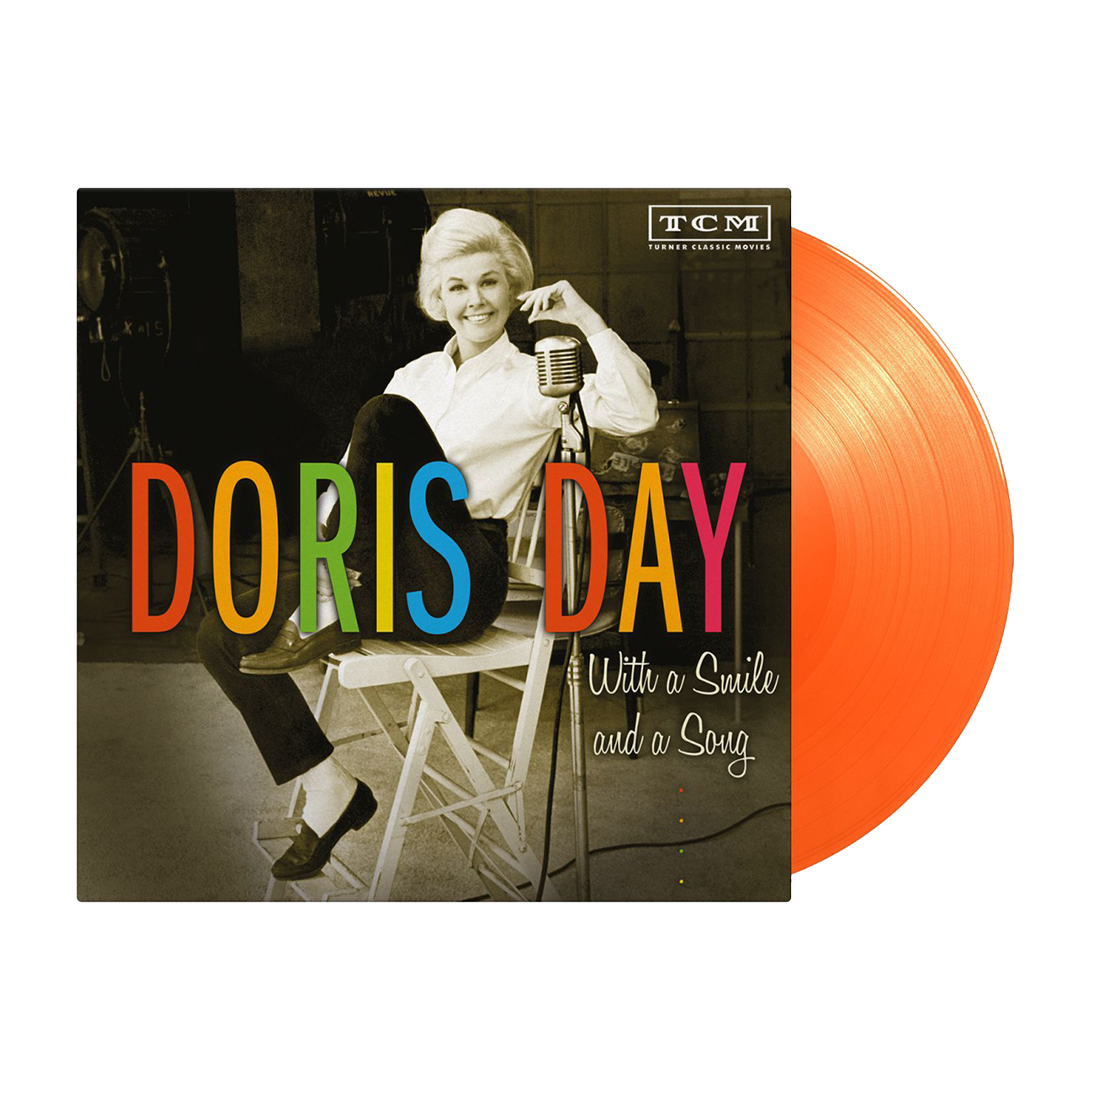 Doris Day - With A Smile and A Song: Limited Orange Vinyl 2LP